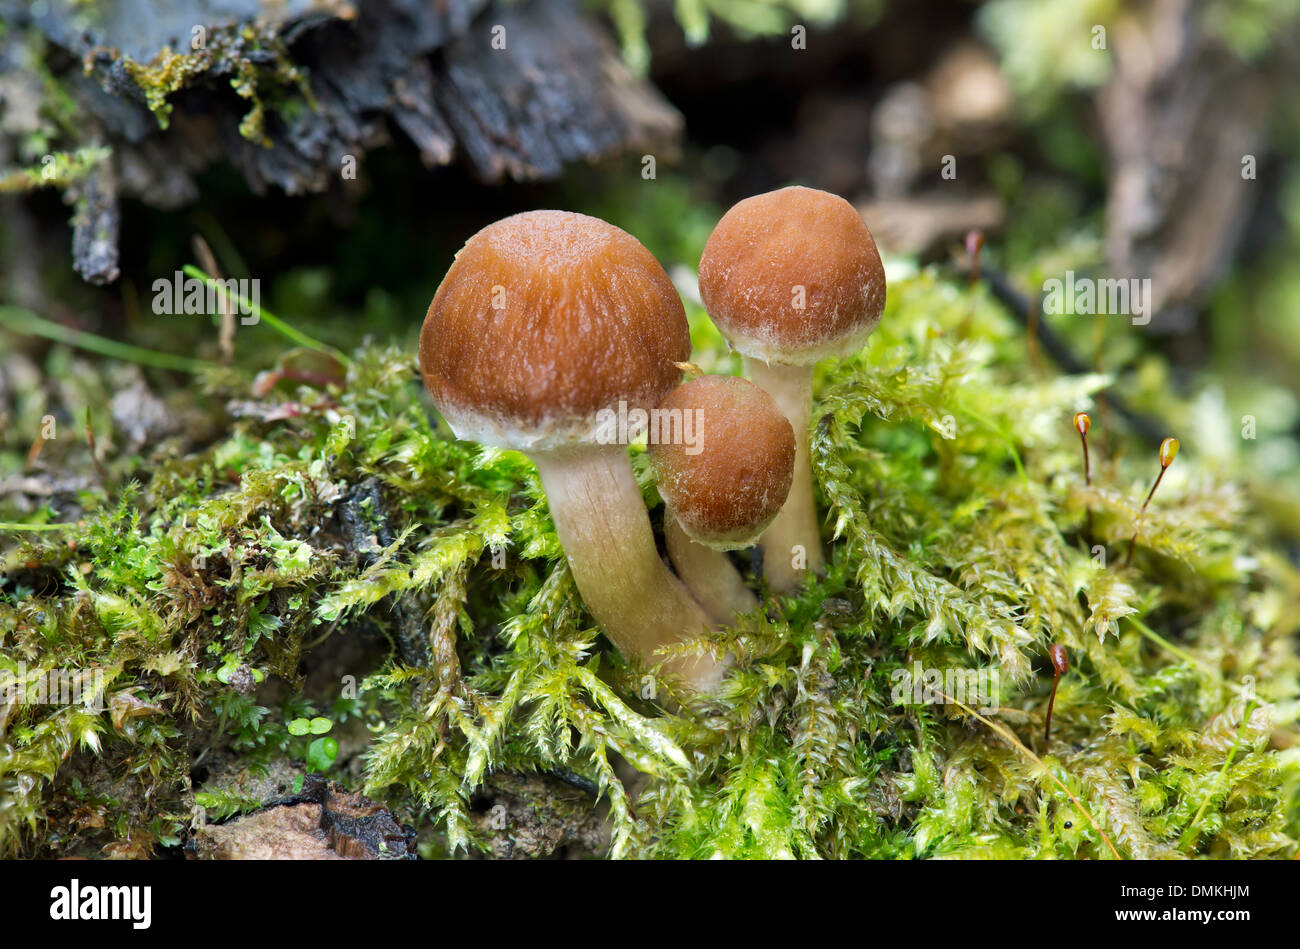 Young stage of Common Stump Brittlestem mushrooms Stock Photo